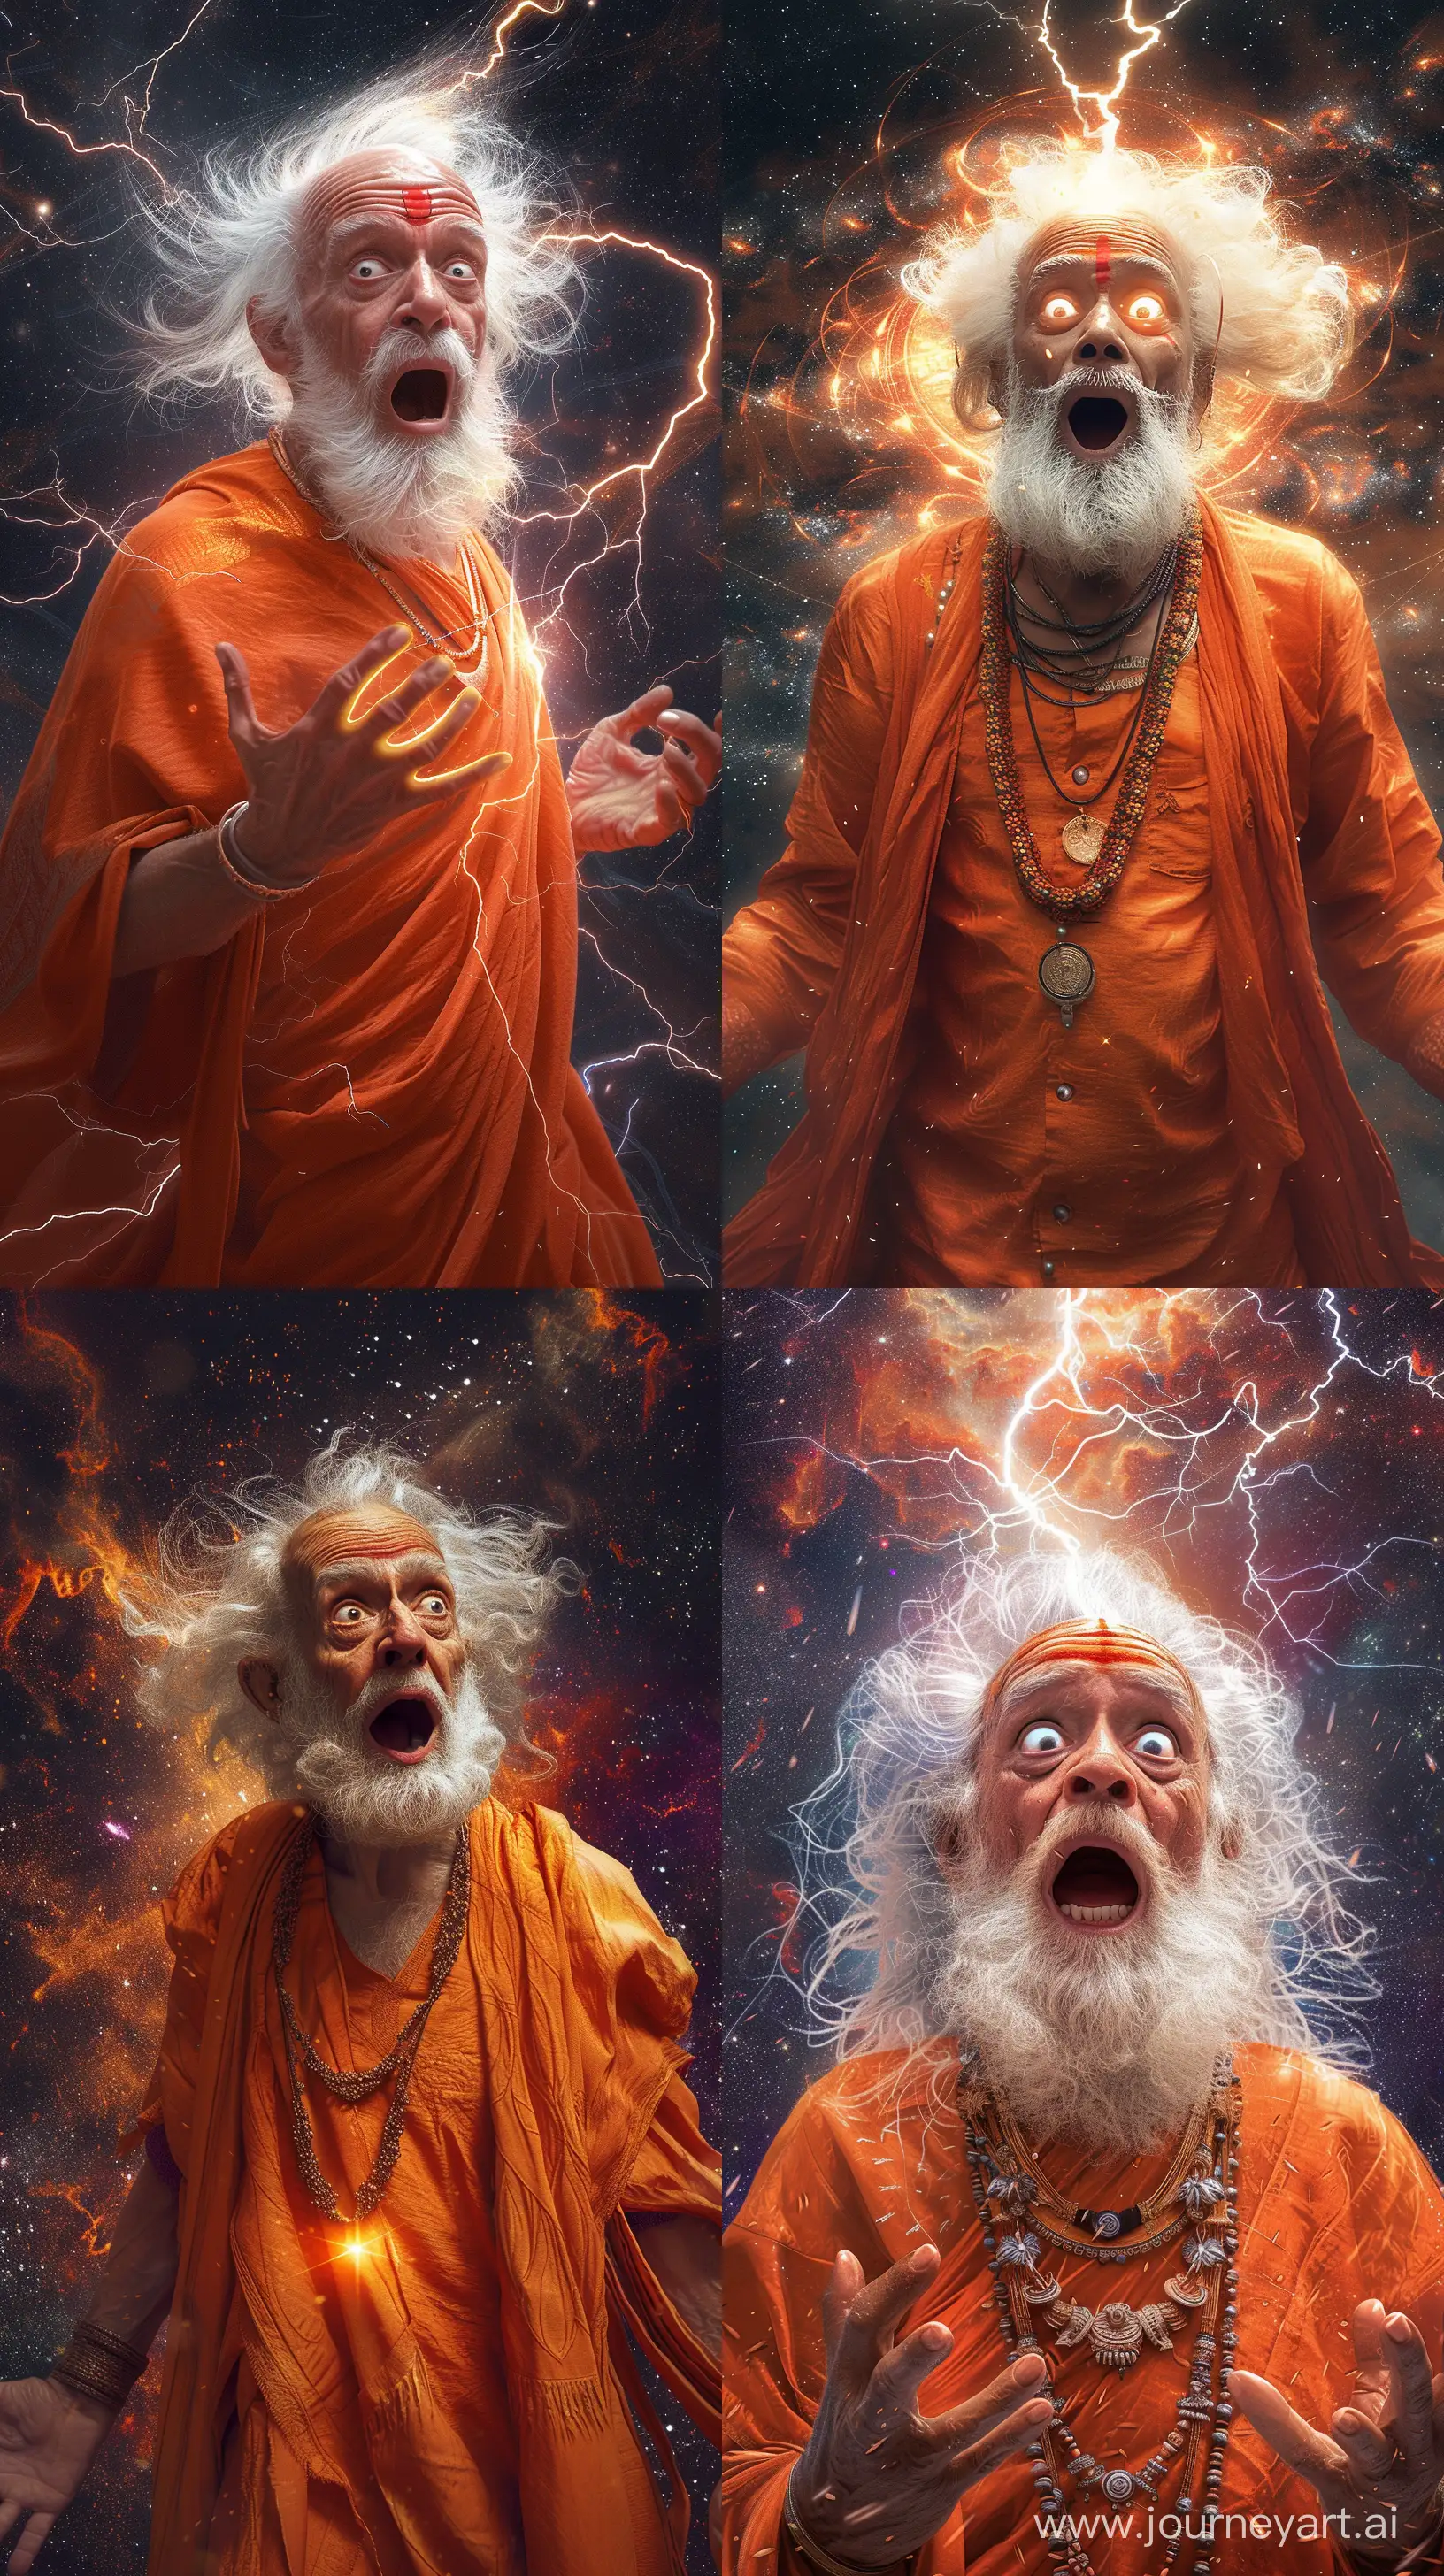 Realistic digital paintings depicting an elder indian sage in an orange attire, white haired and bearded, shocked yet lighting smiling face as if he's impressed, intricate details, serene cosmic background, high resolution UHD, --ar 9:16